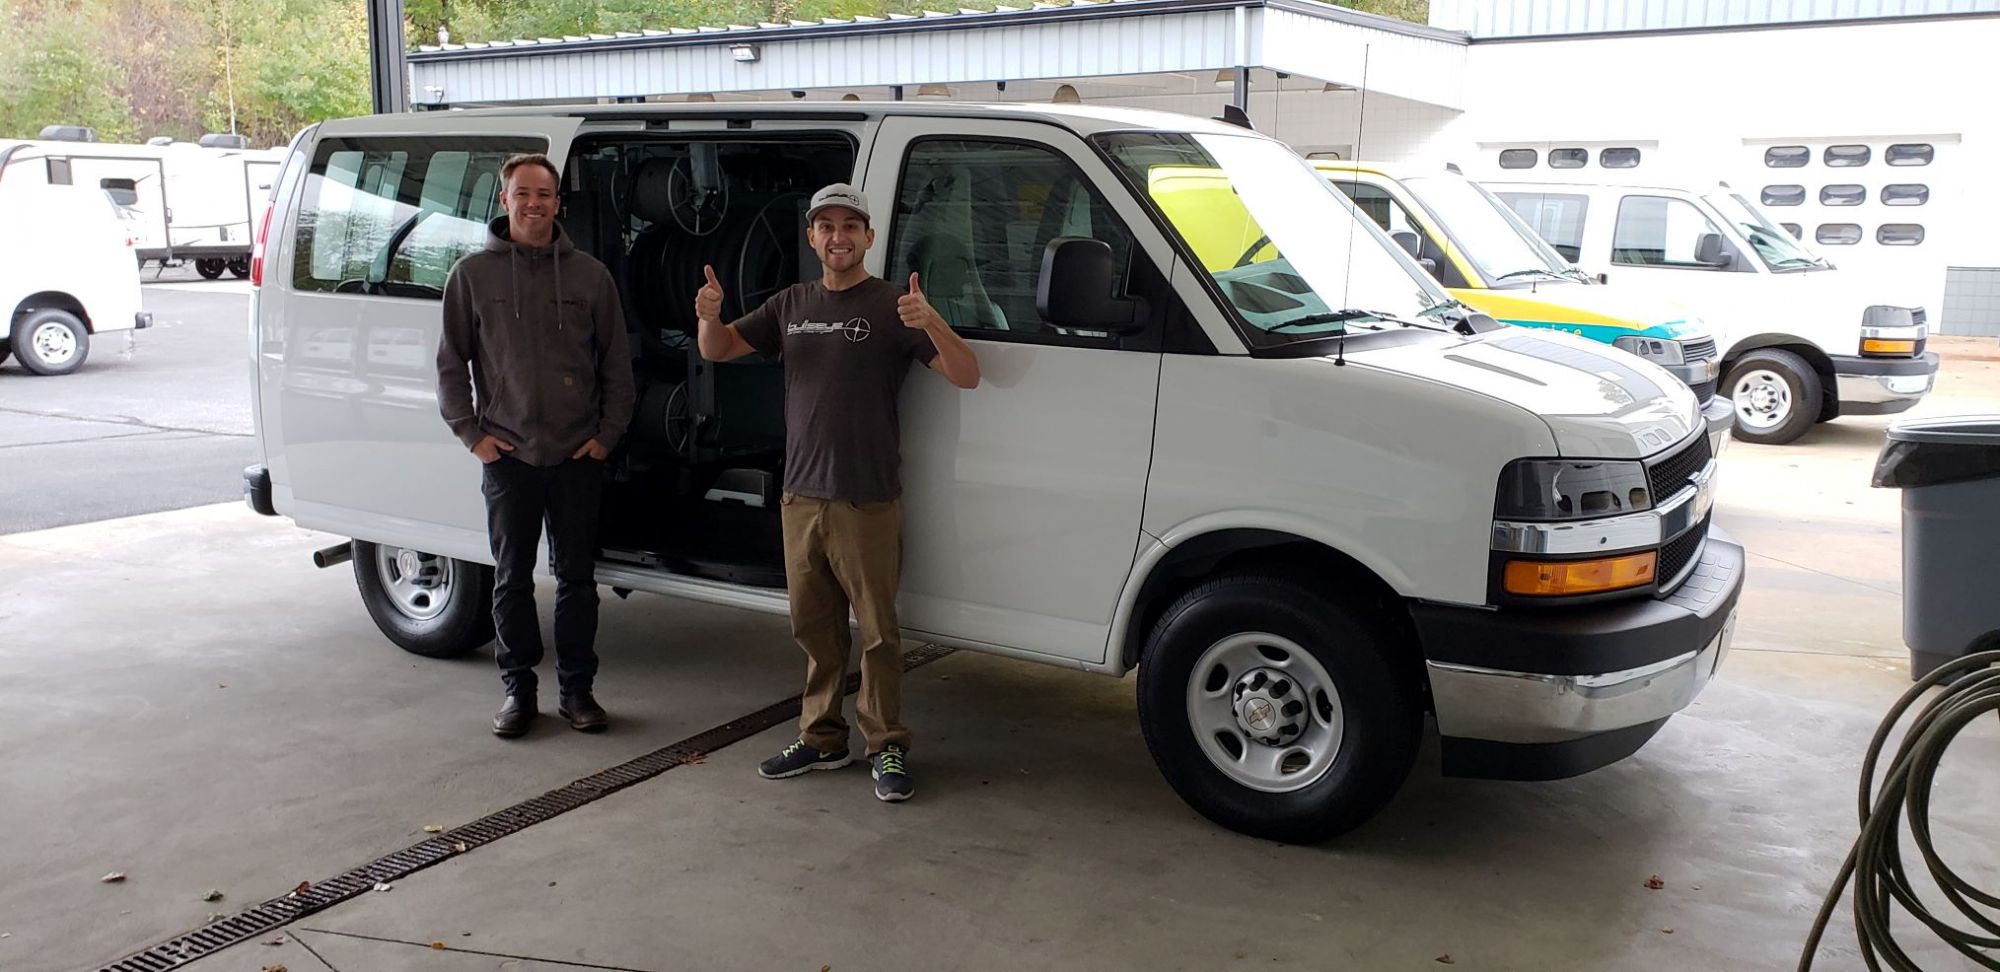 Mr. Travis Campbell and Todd Mason on the purchased a new Butler System Truckmount Machine